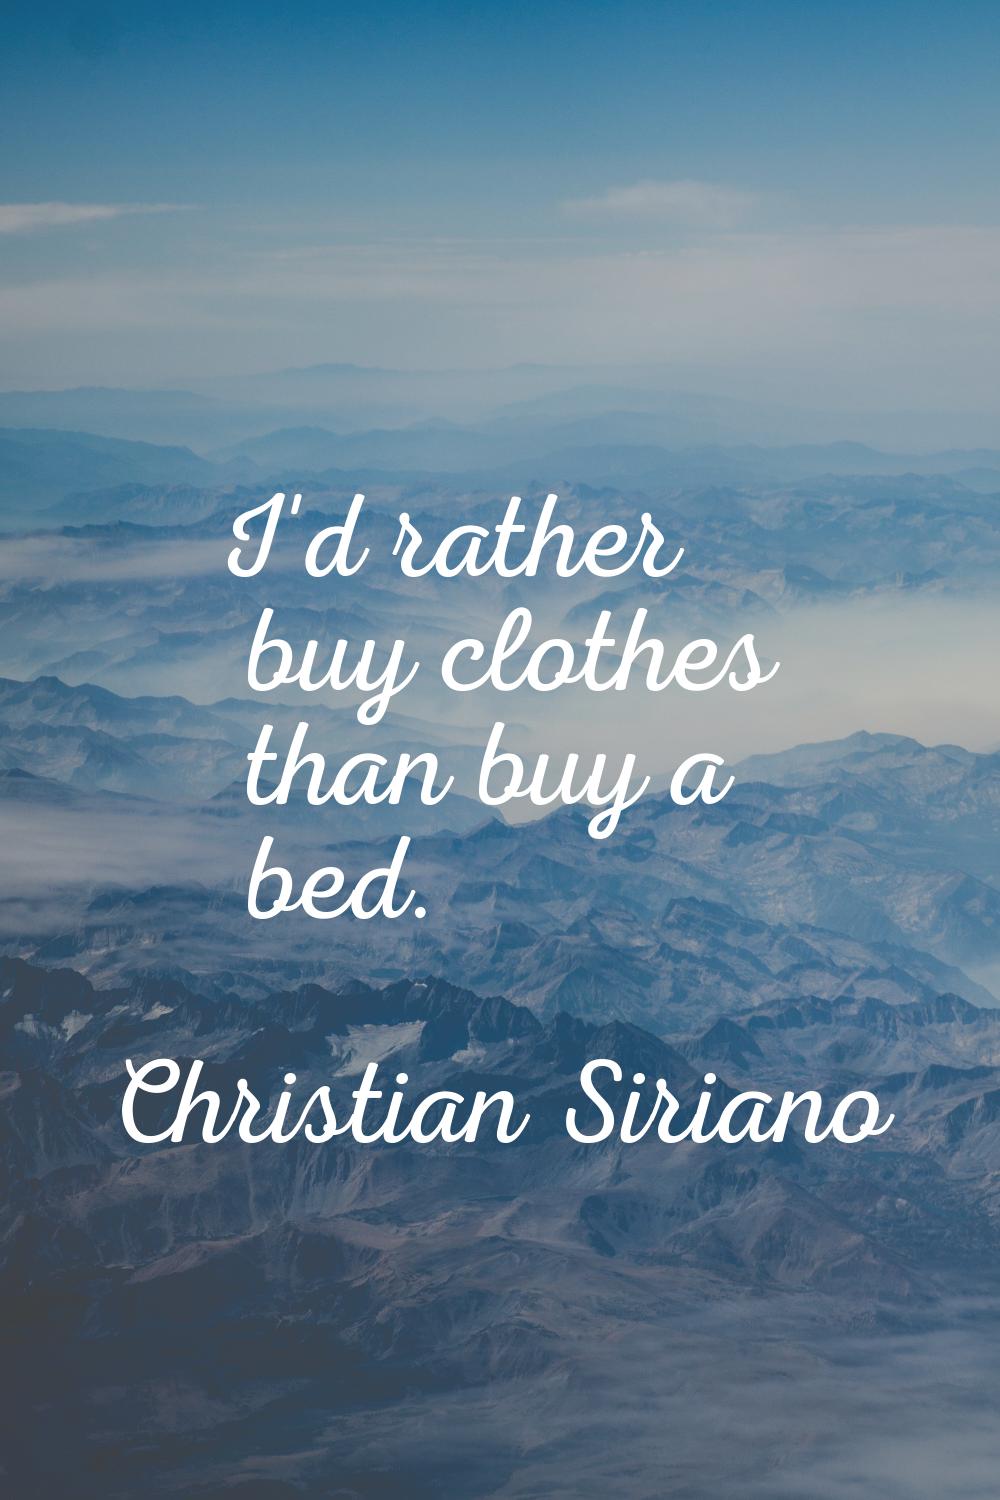 I'd rather buy clothes than buy a bed.